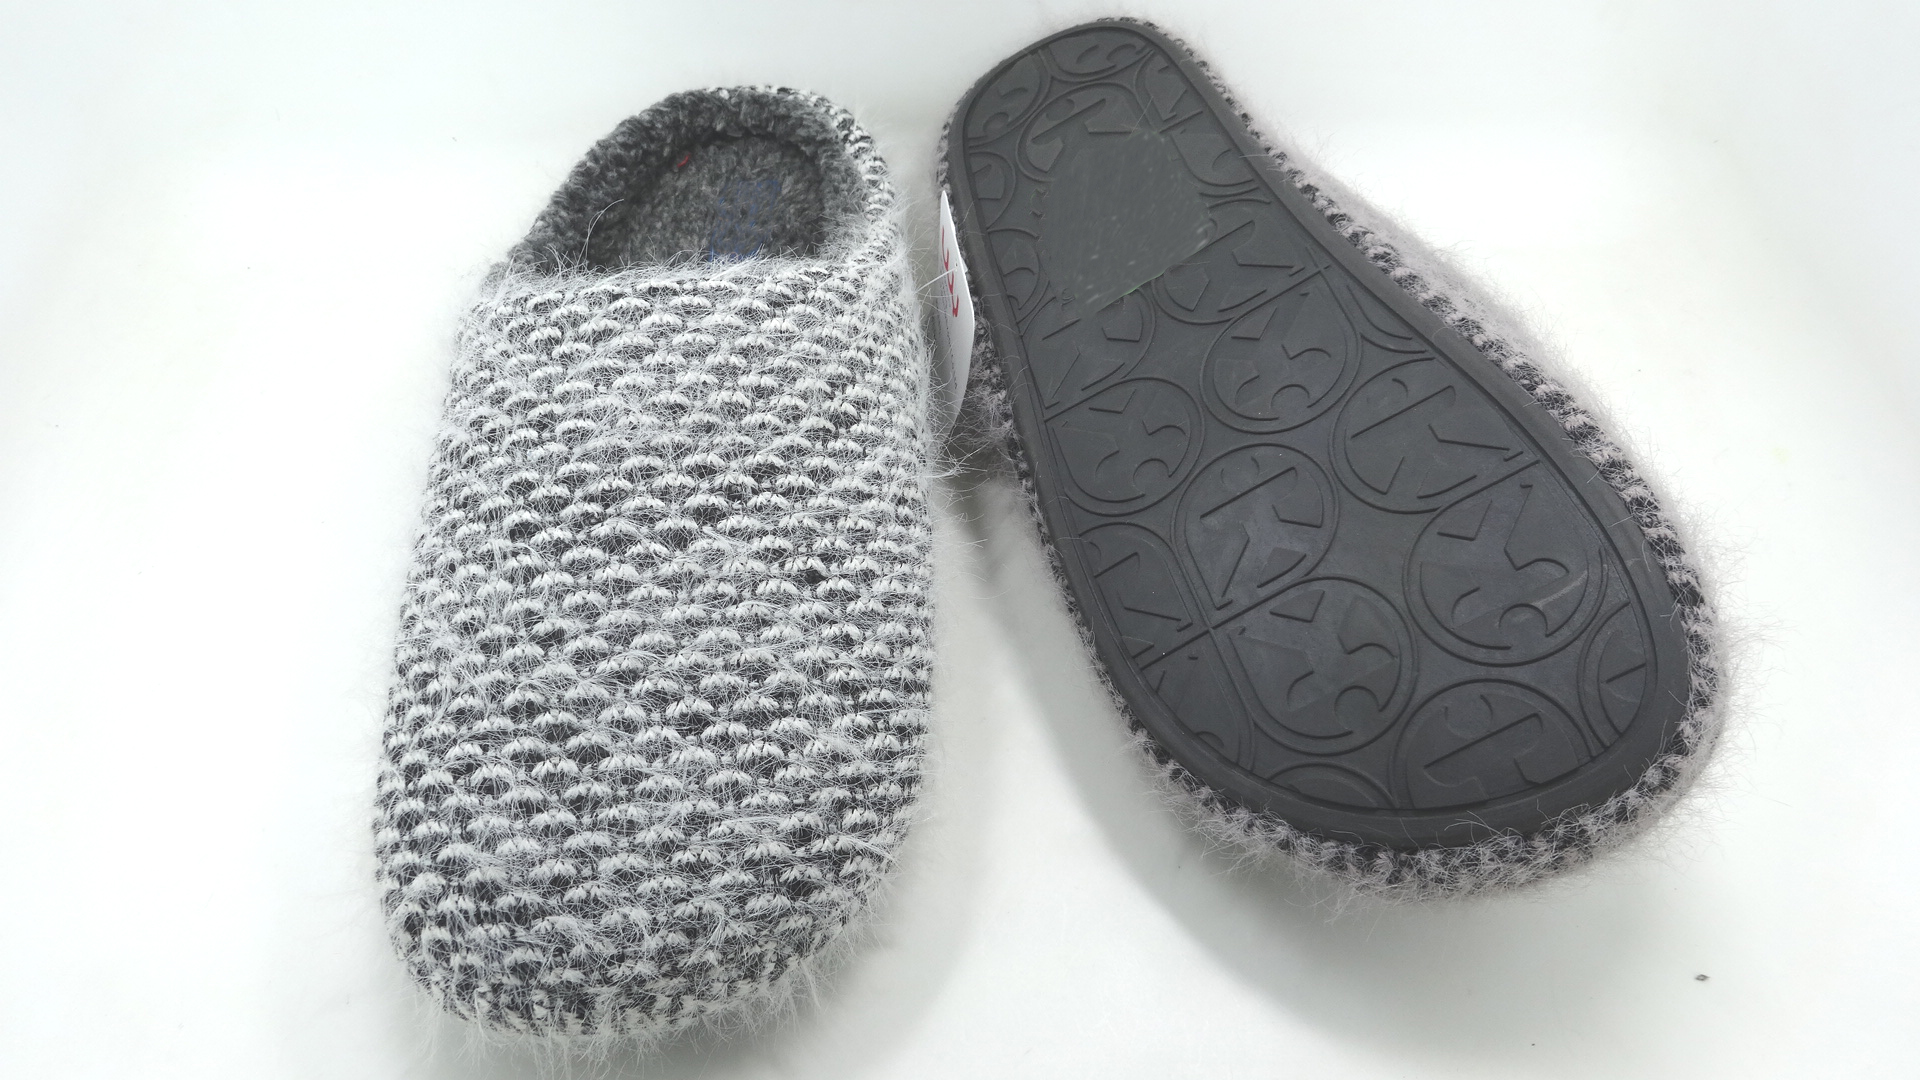  Men's  House Knitted Slippers, Cozy Bedroom Indoor Slip on Shoes 